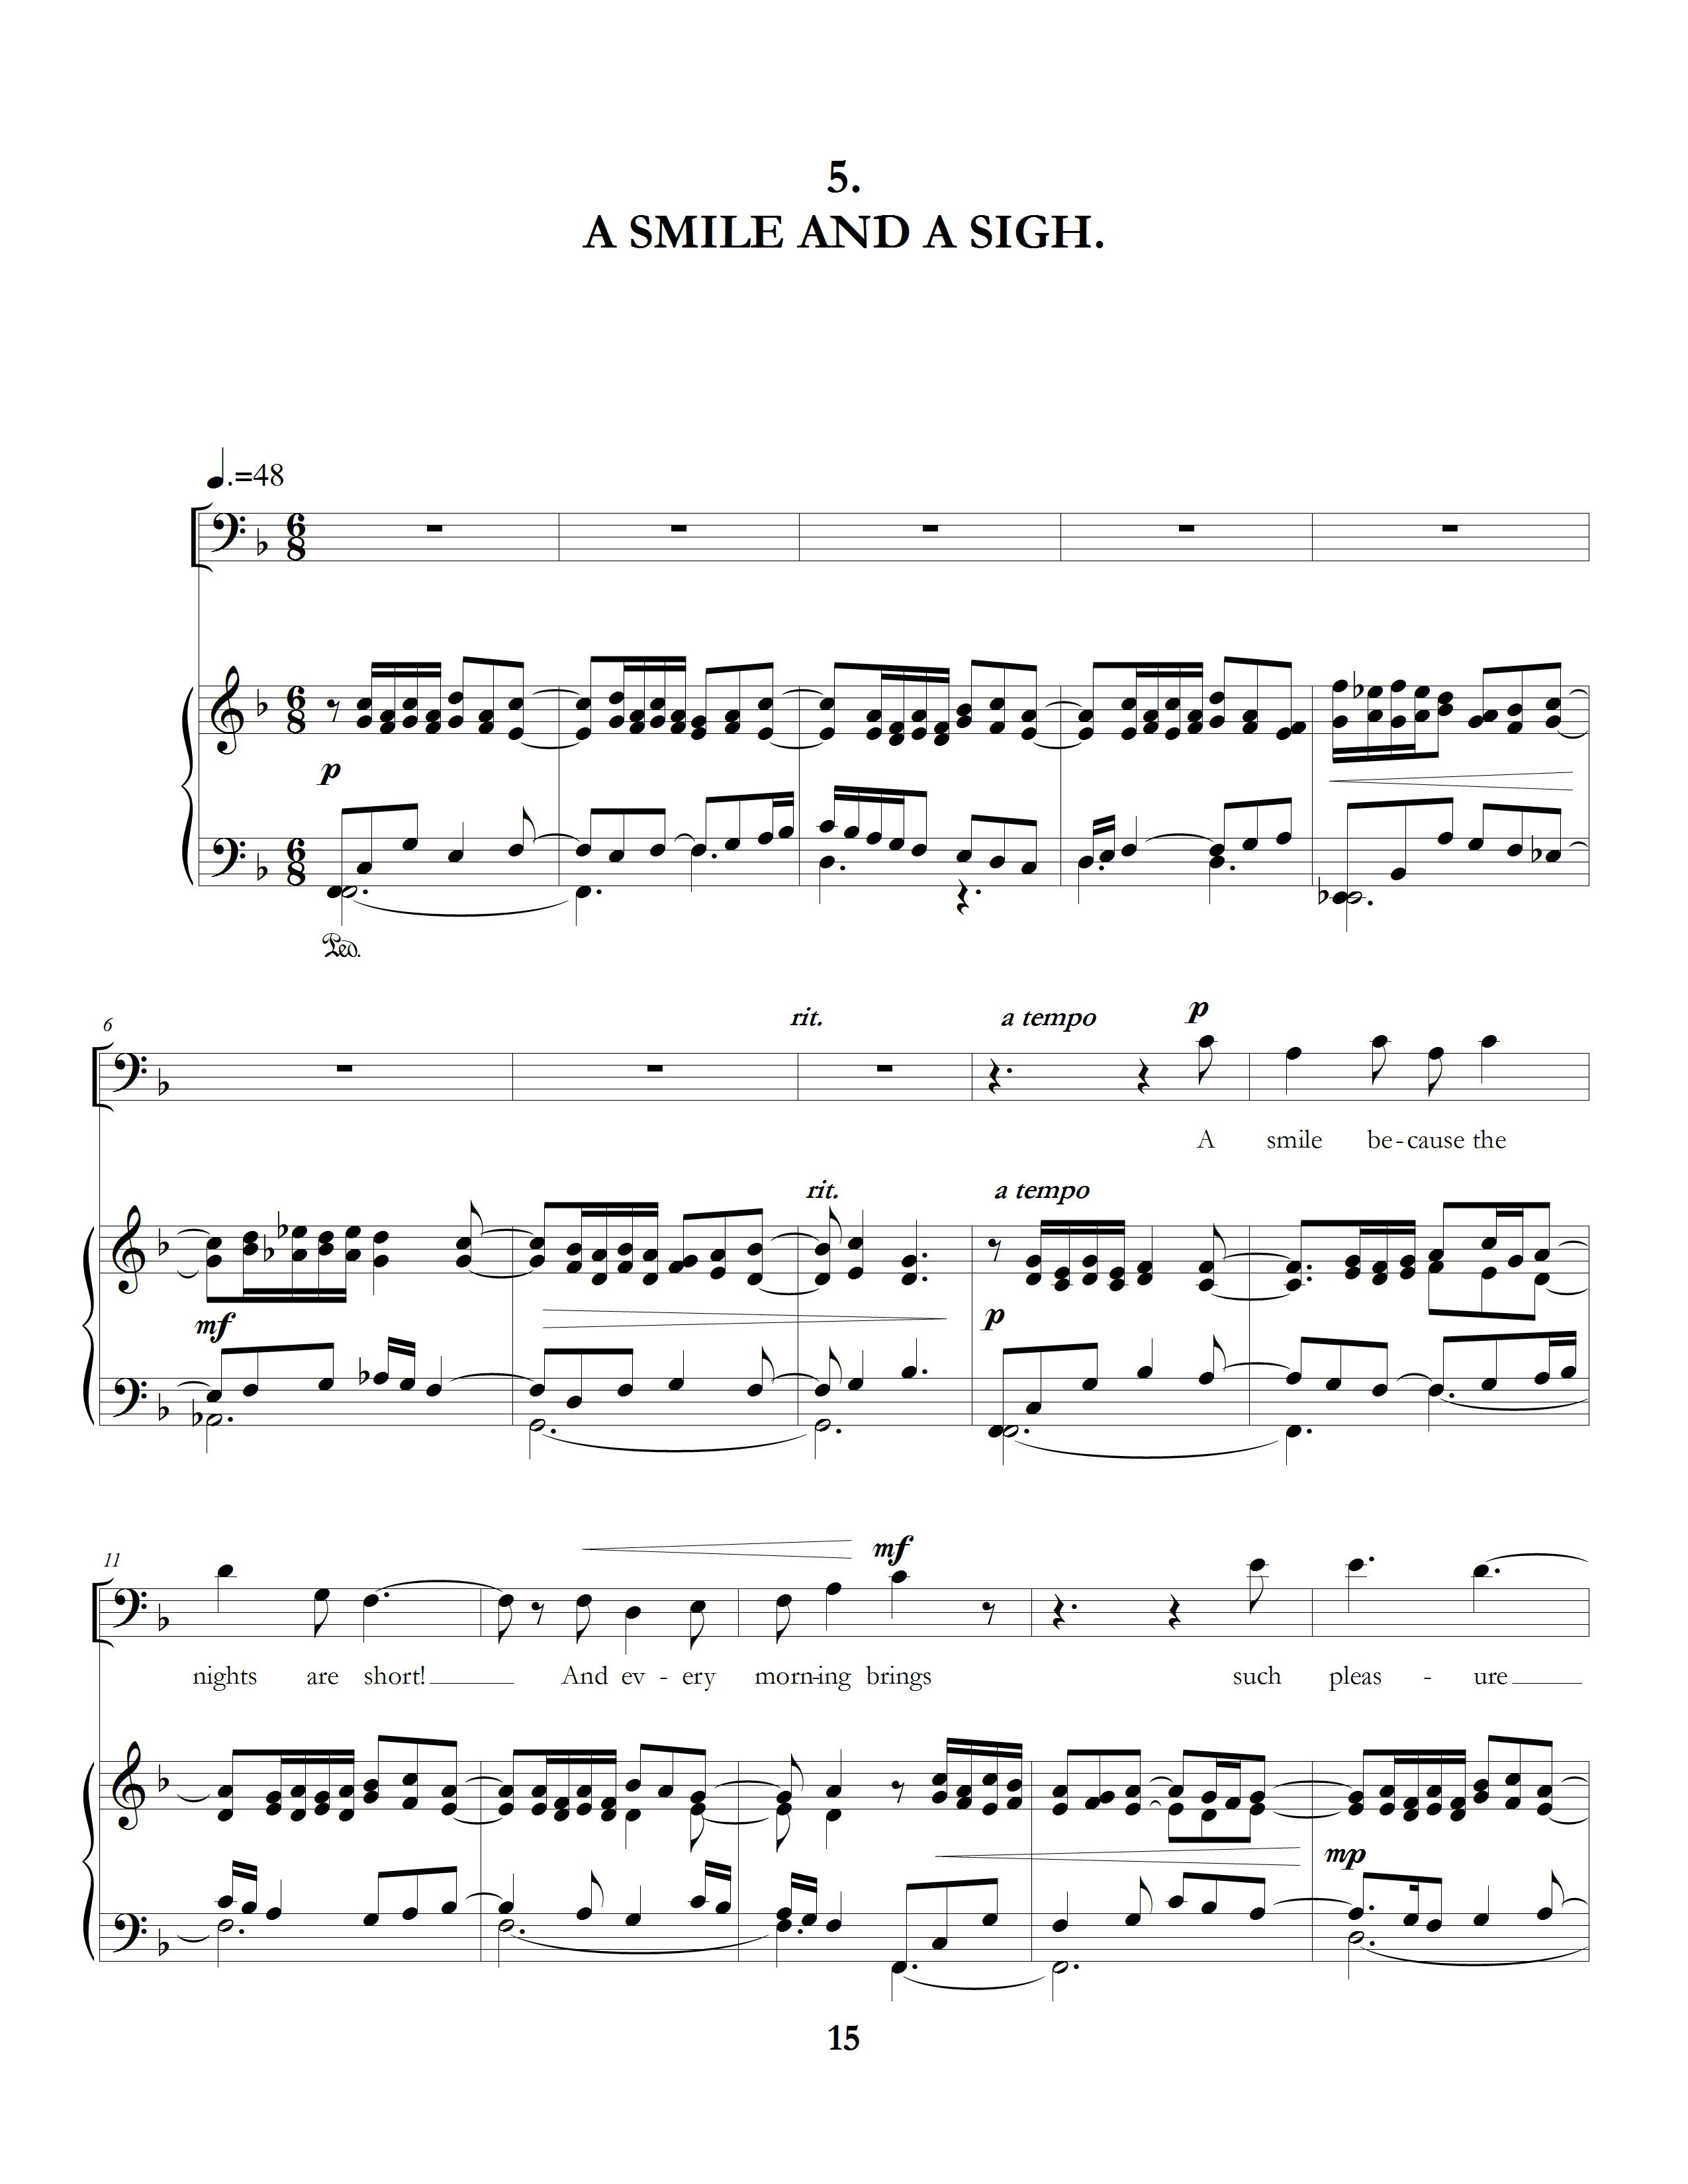 "The Long Hours: Five Rossetti Art Songs", movement five, page one